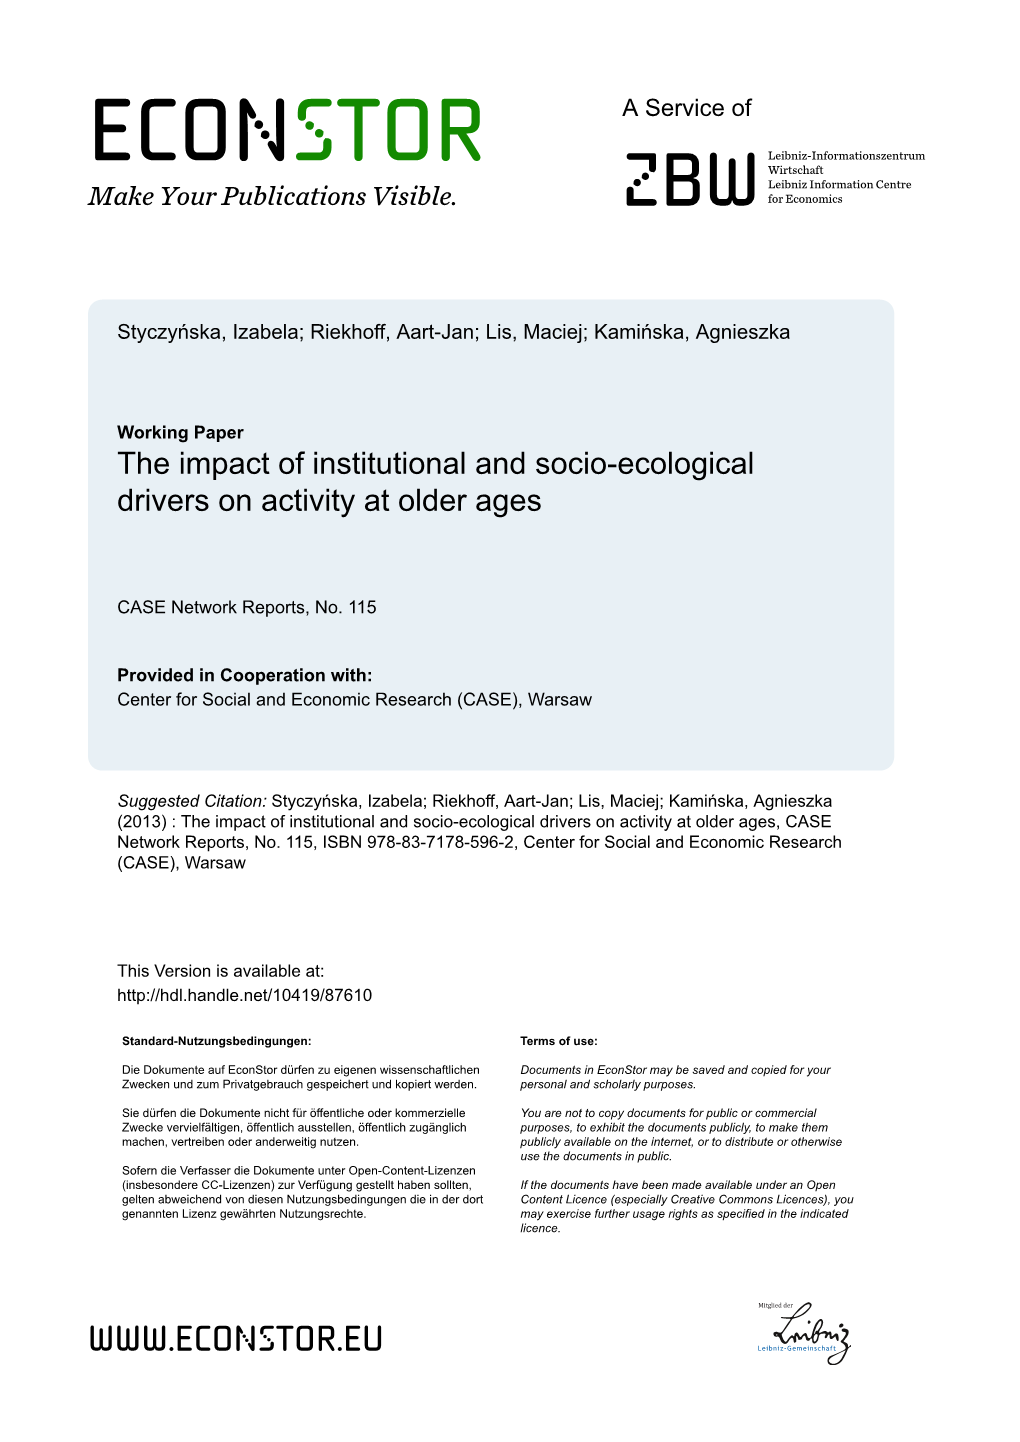 The Impact of Institutional and Socio-Ecological Drivers on Activity at Older Ages